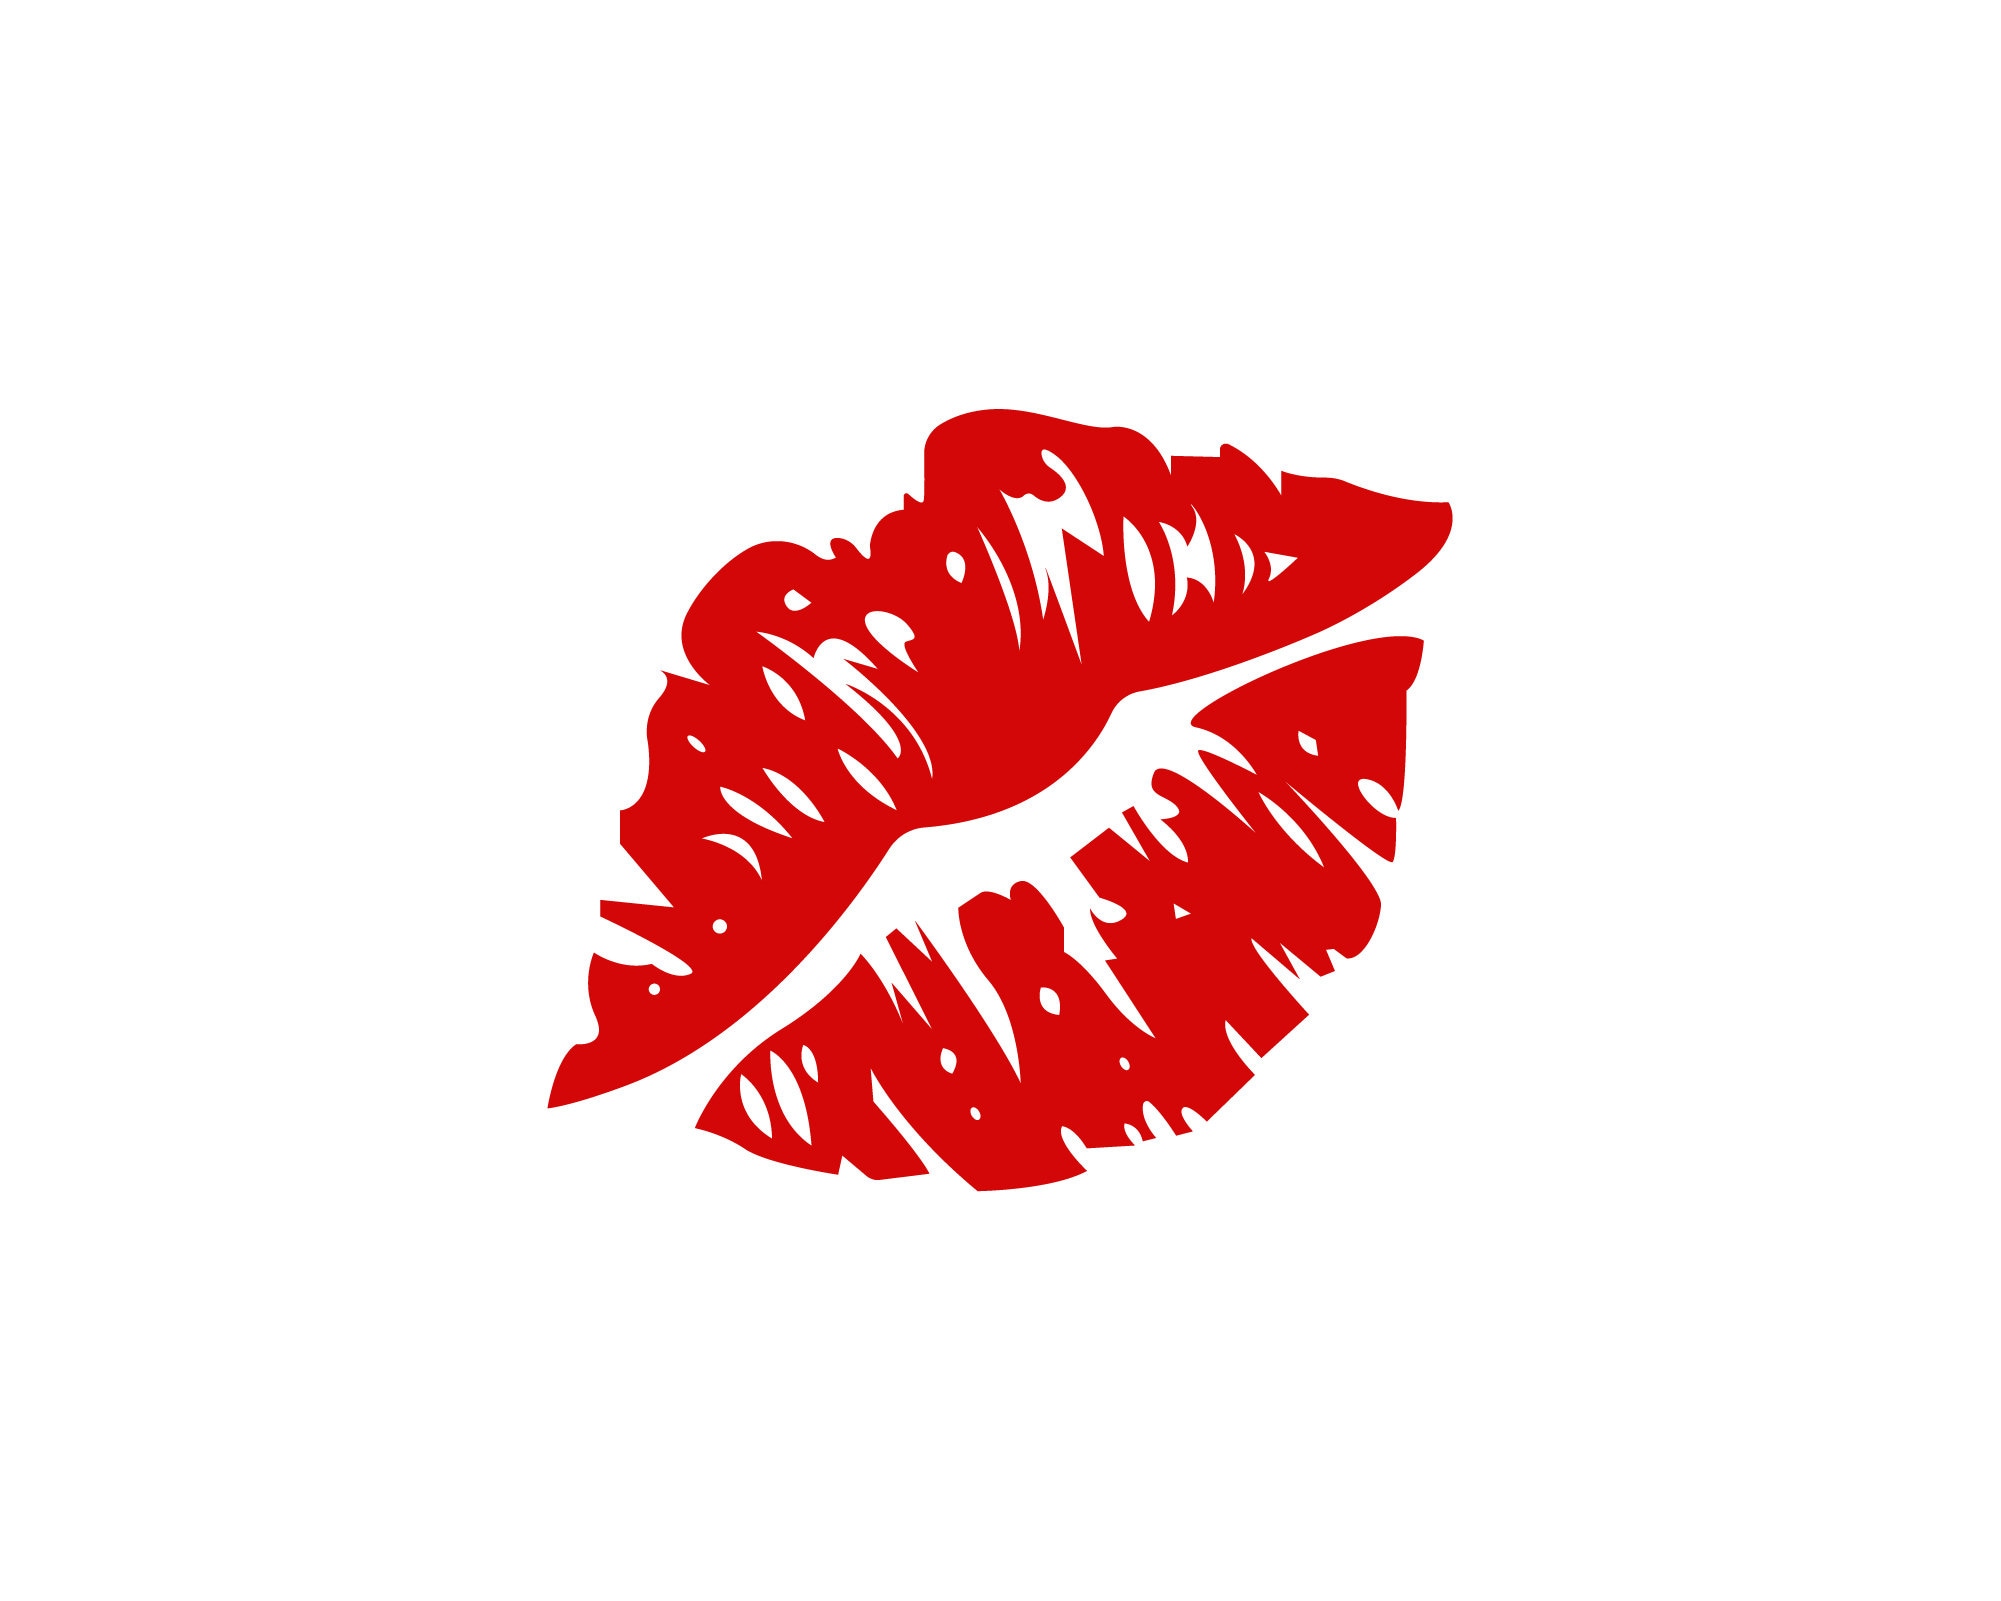 dahlia wati recommends red lipstick kiss marks pic